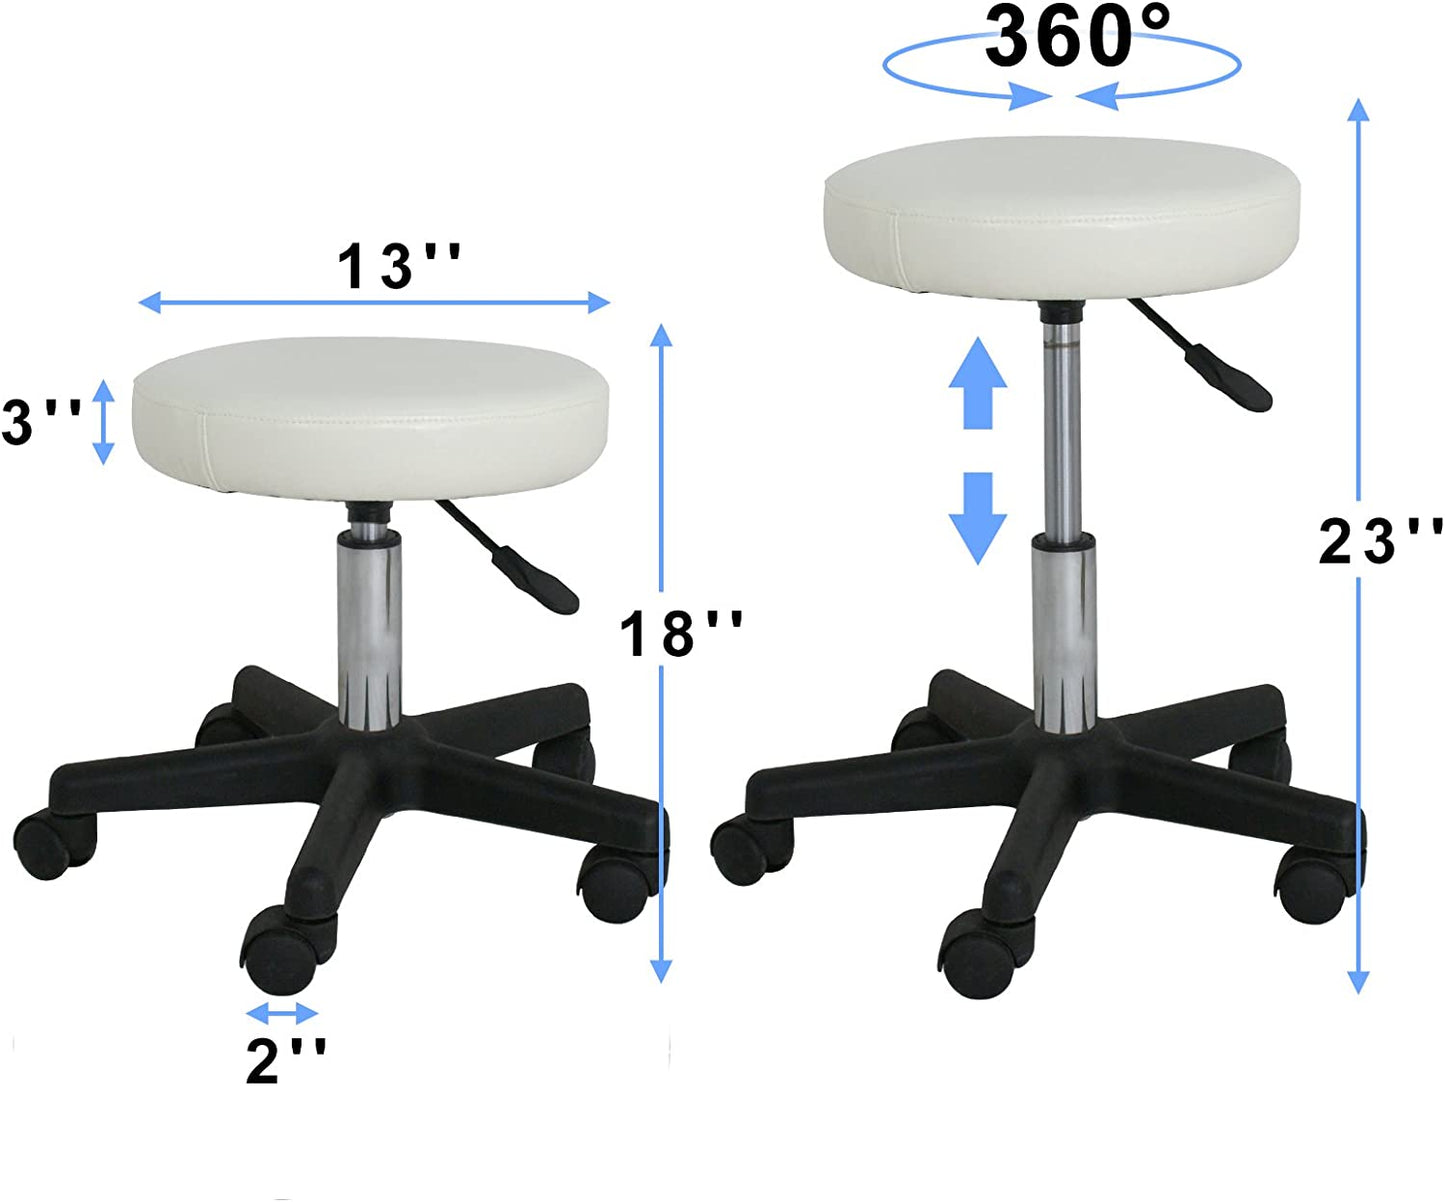 Adjustable Rolling Stool with Wheels Swivel Stool Chair Hydraulic Stool Office Stool for Beauty Salon Massage Spa Medical Tattoo Drafting, White